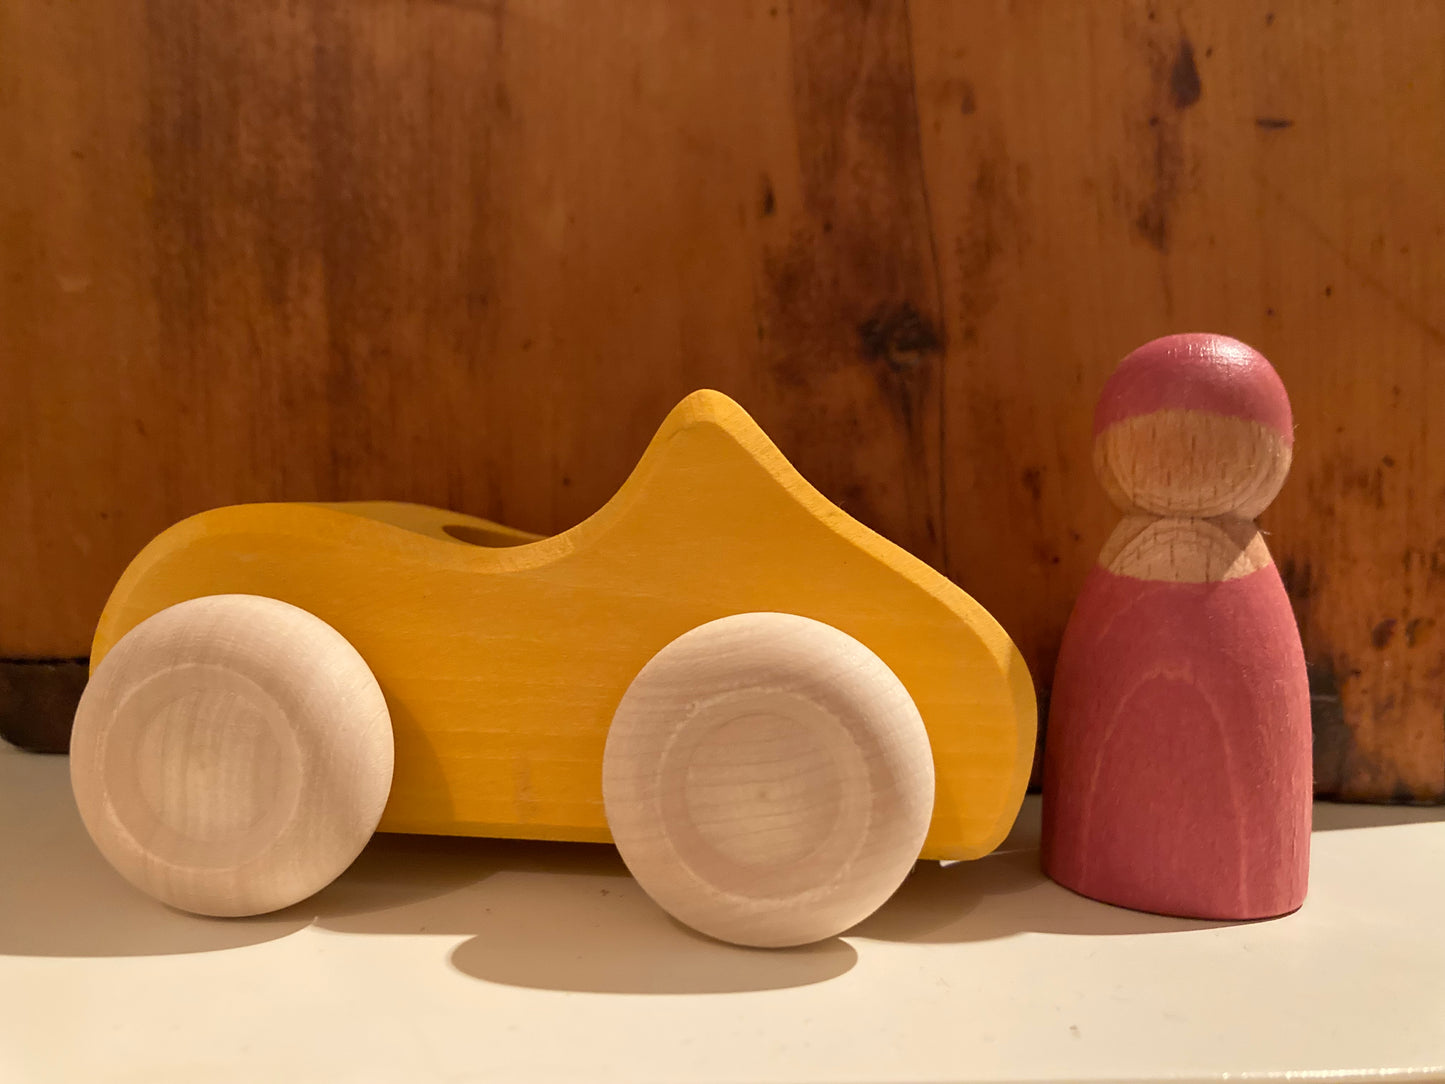 Wooden Toy Car - YELLOW CONVERTIBLE with driver